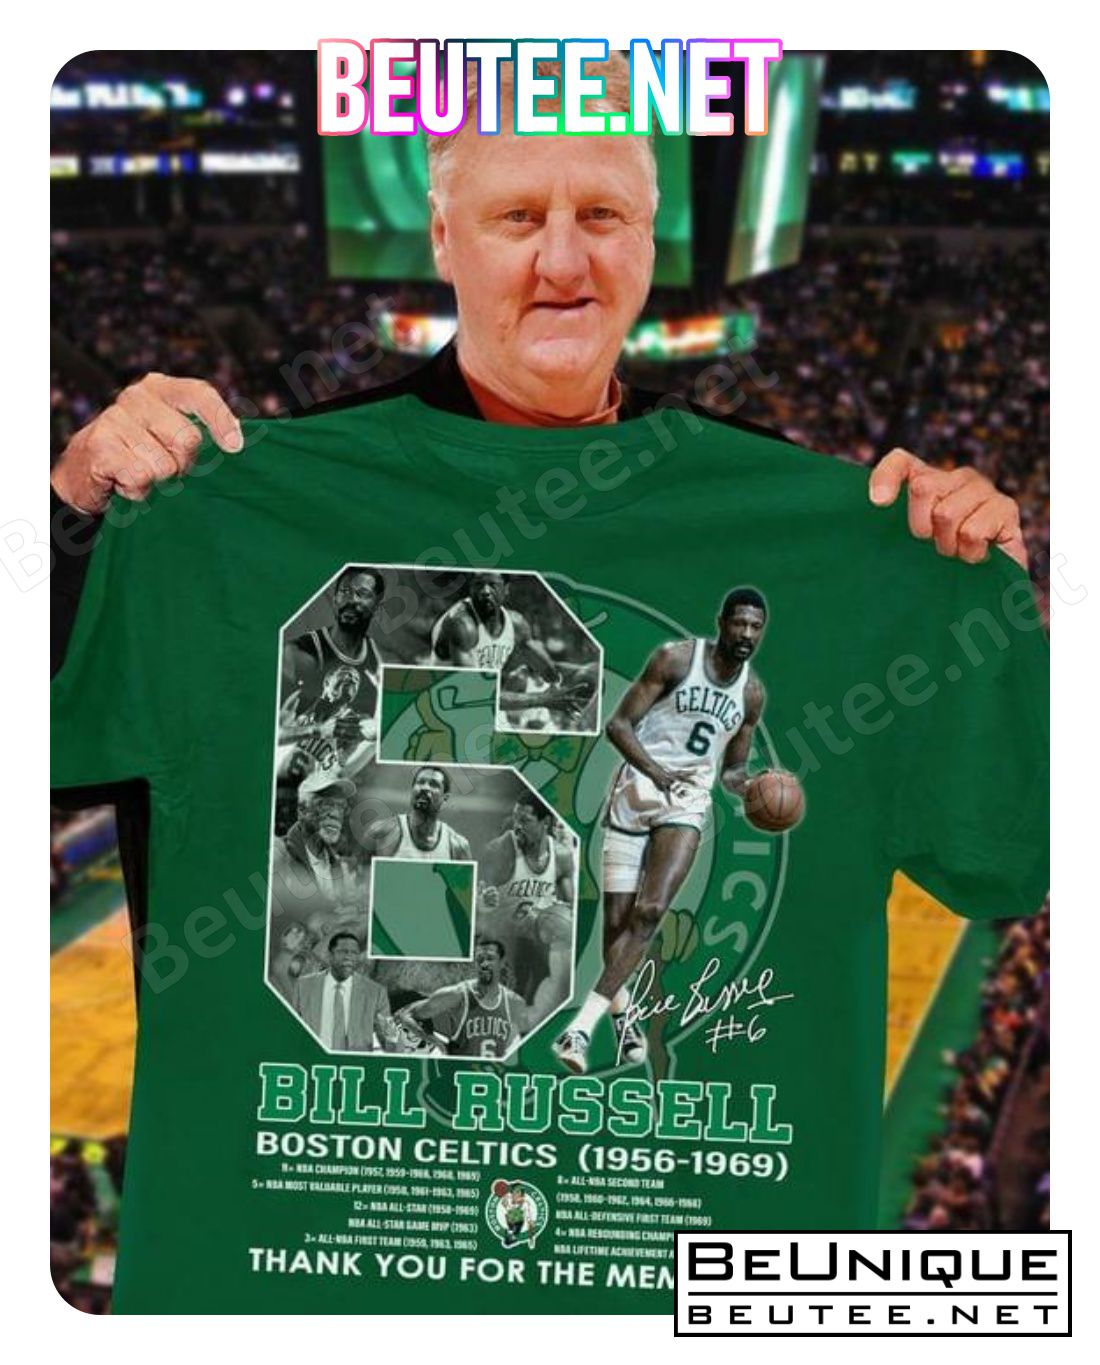 Bill Russell 6 Boston Celtics 1956-1969 Thank You For The Memories Signature Shirt